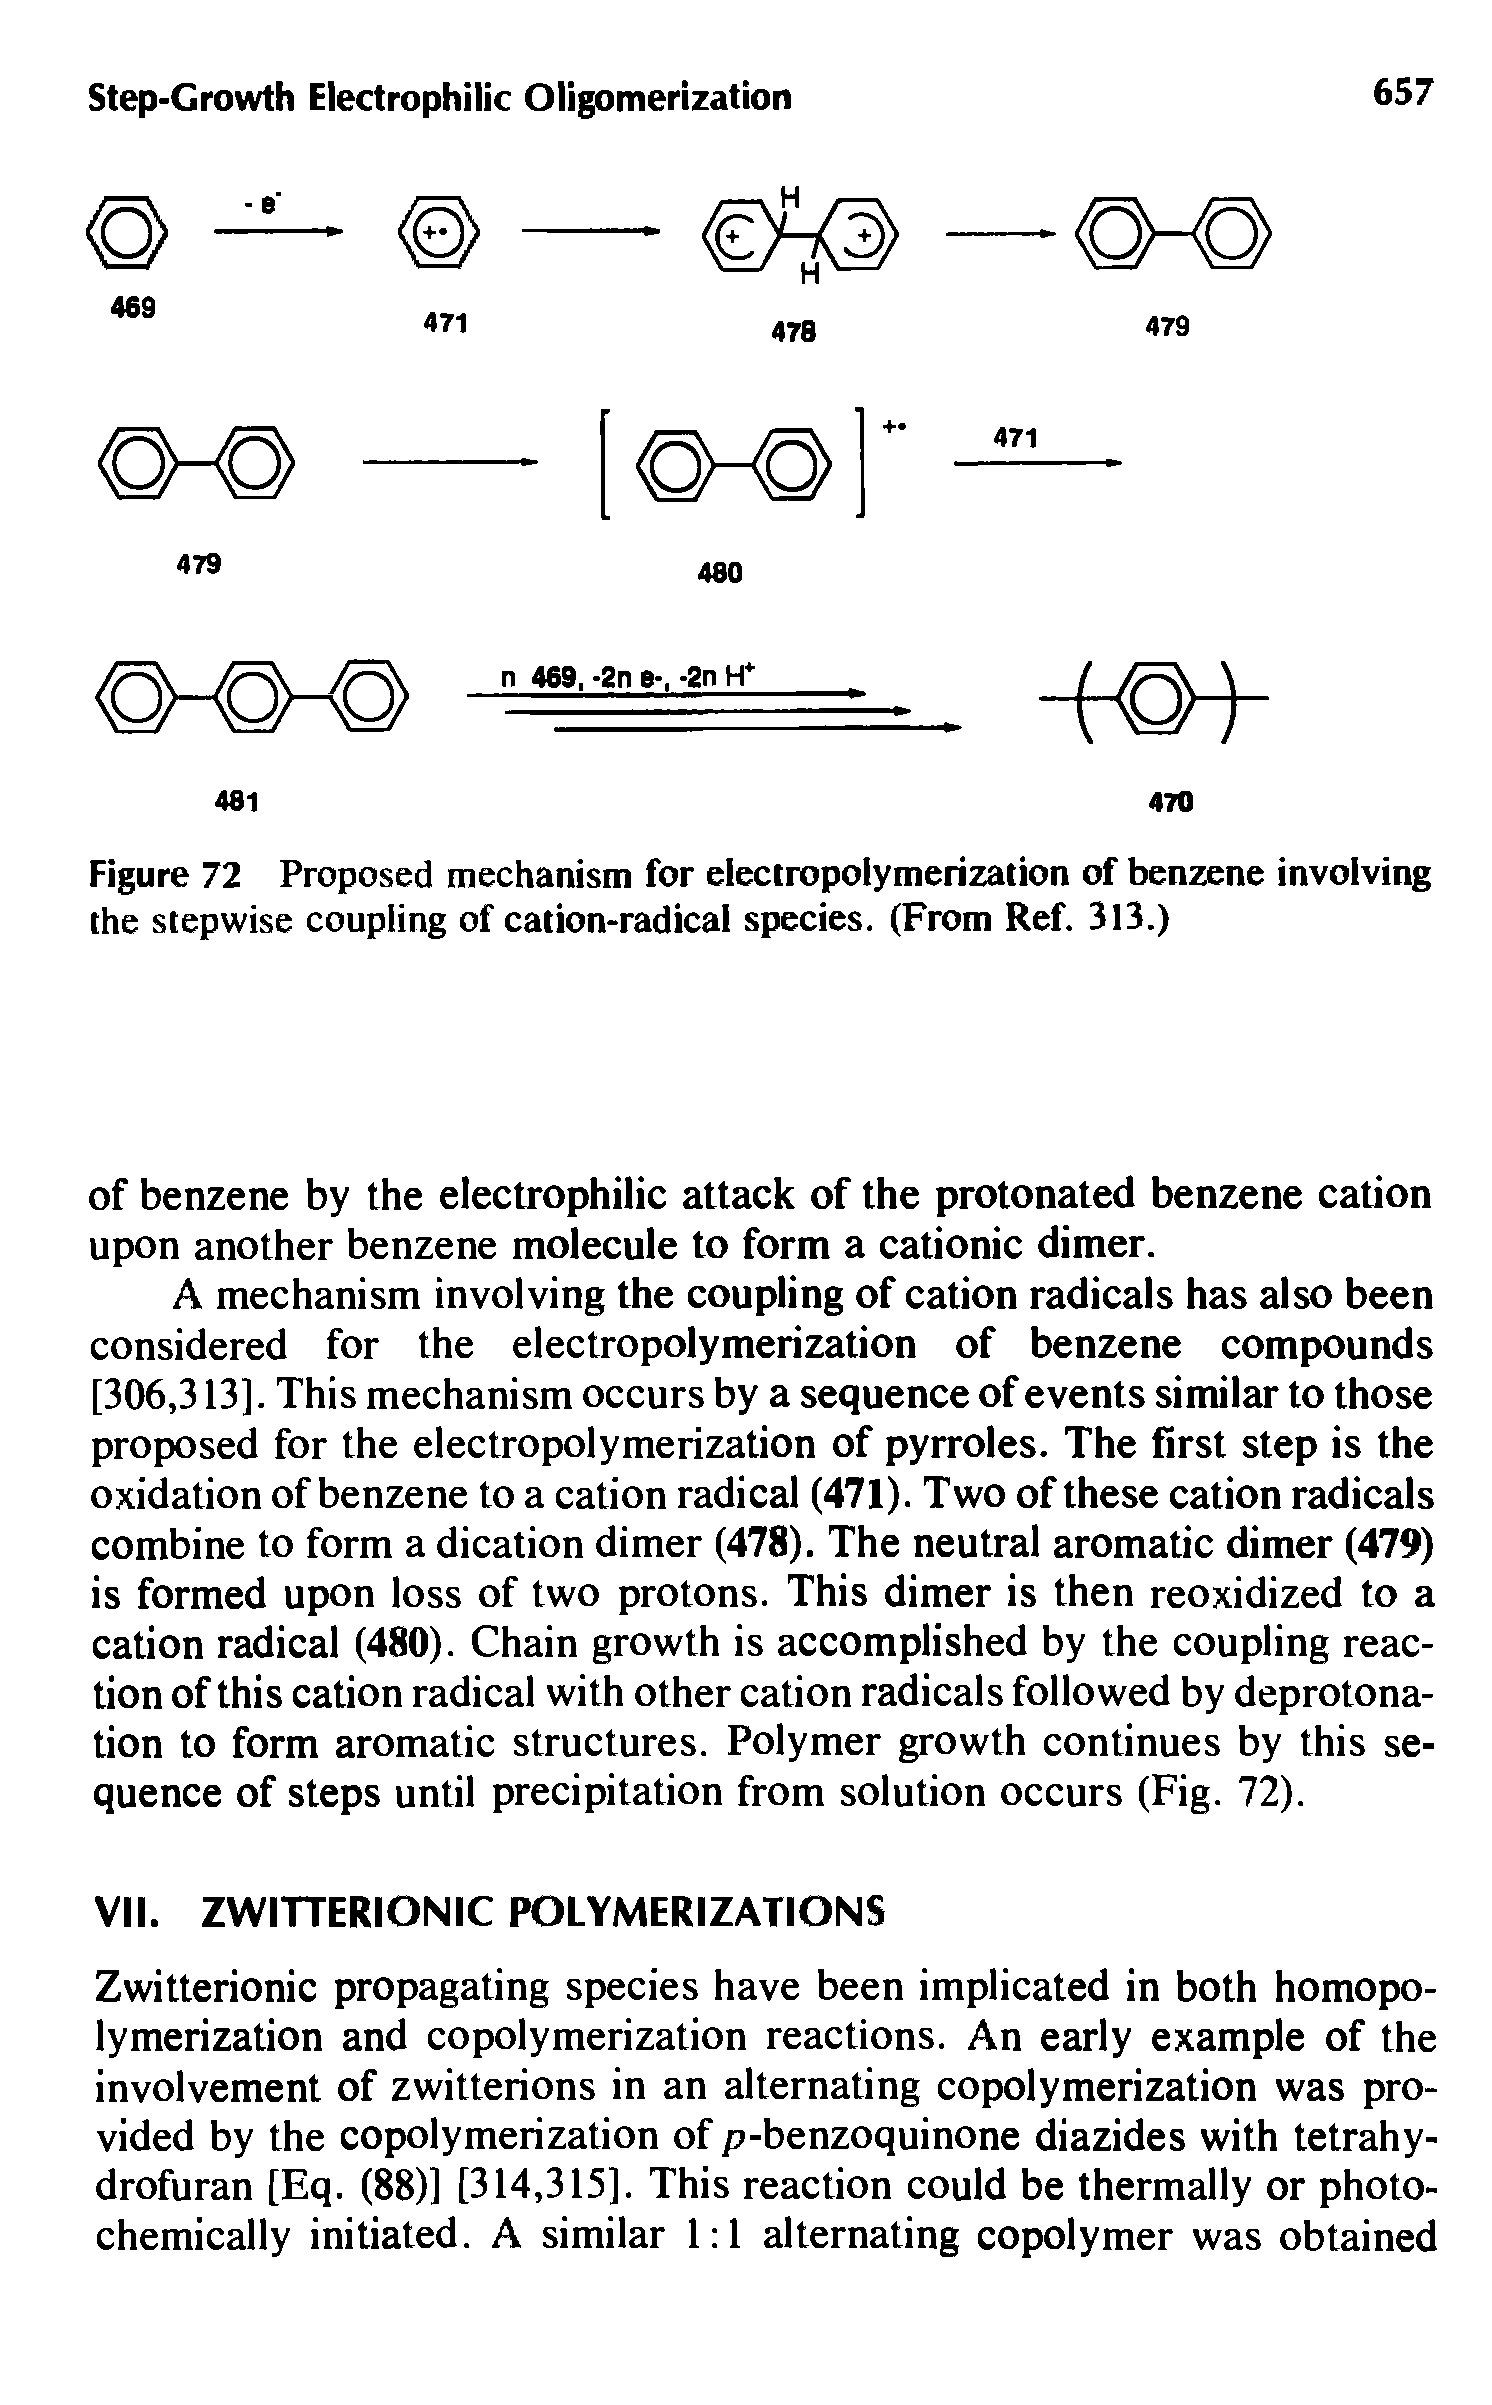 Figure 72 Proposed mechanism for electropolymerization of benzene involving the stepwise coupling of cation-radical species. (From Ref. 313.)...